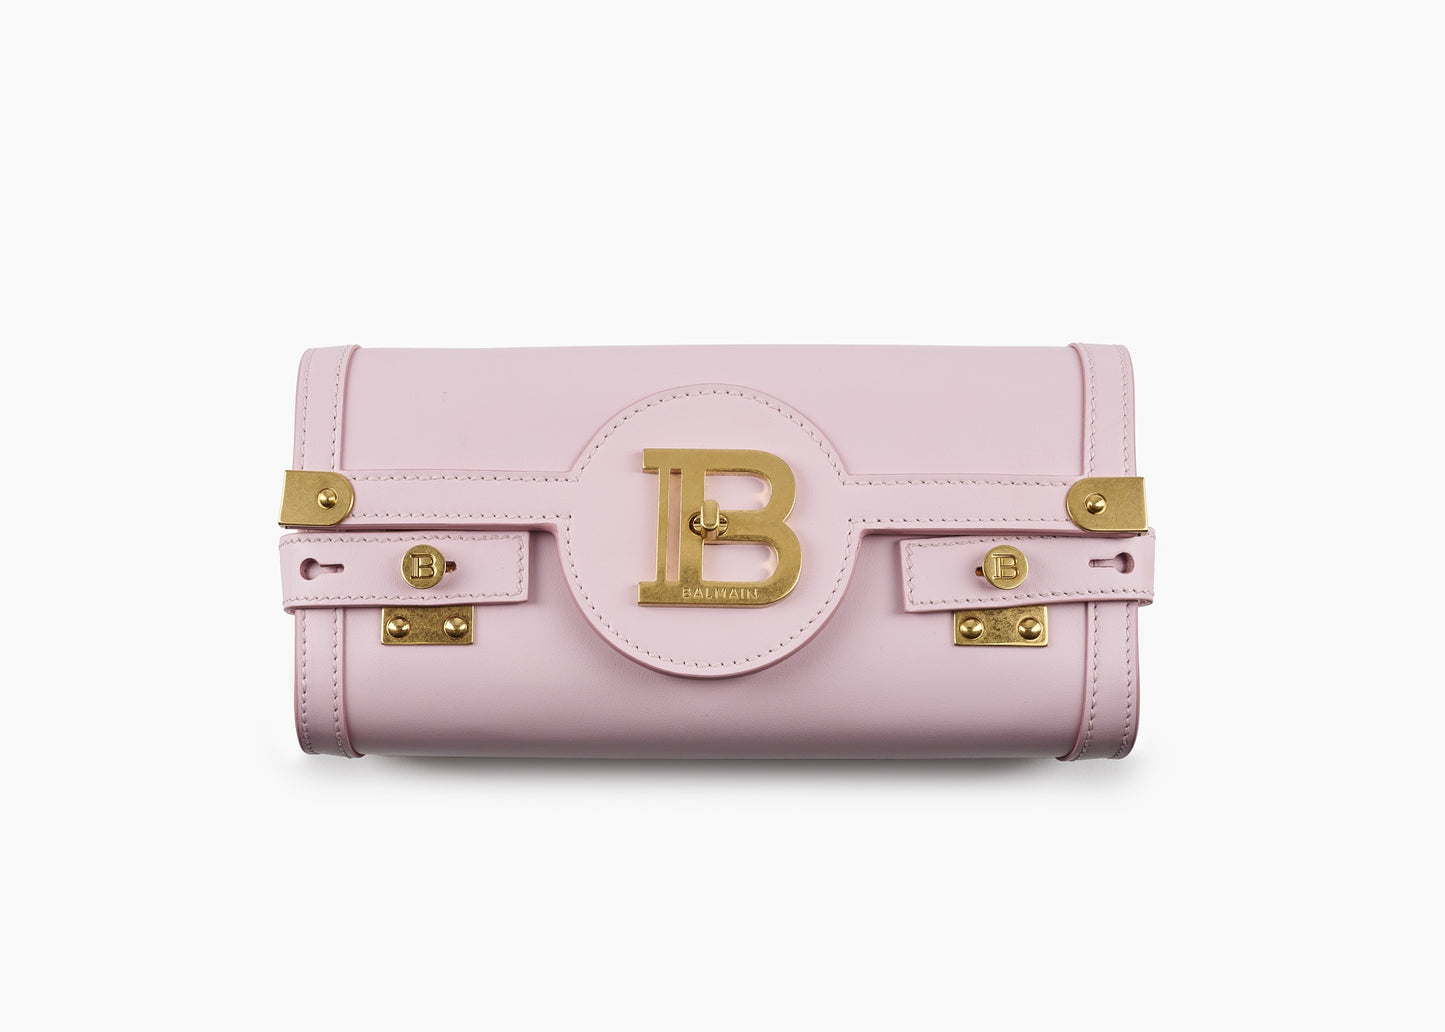 B-Buzz 23 Clutch Bag Smooth Leather Pale Pink